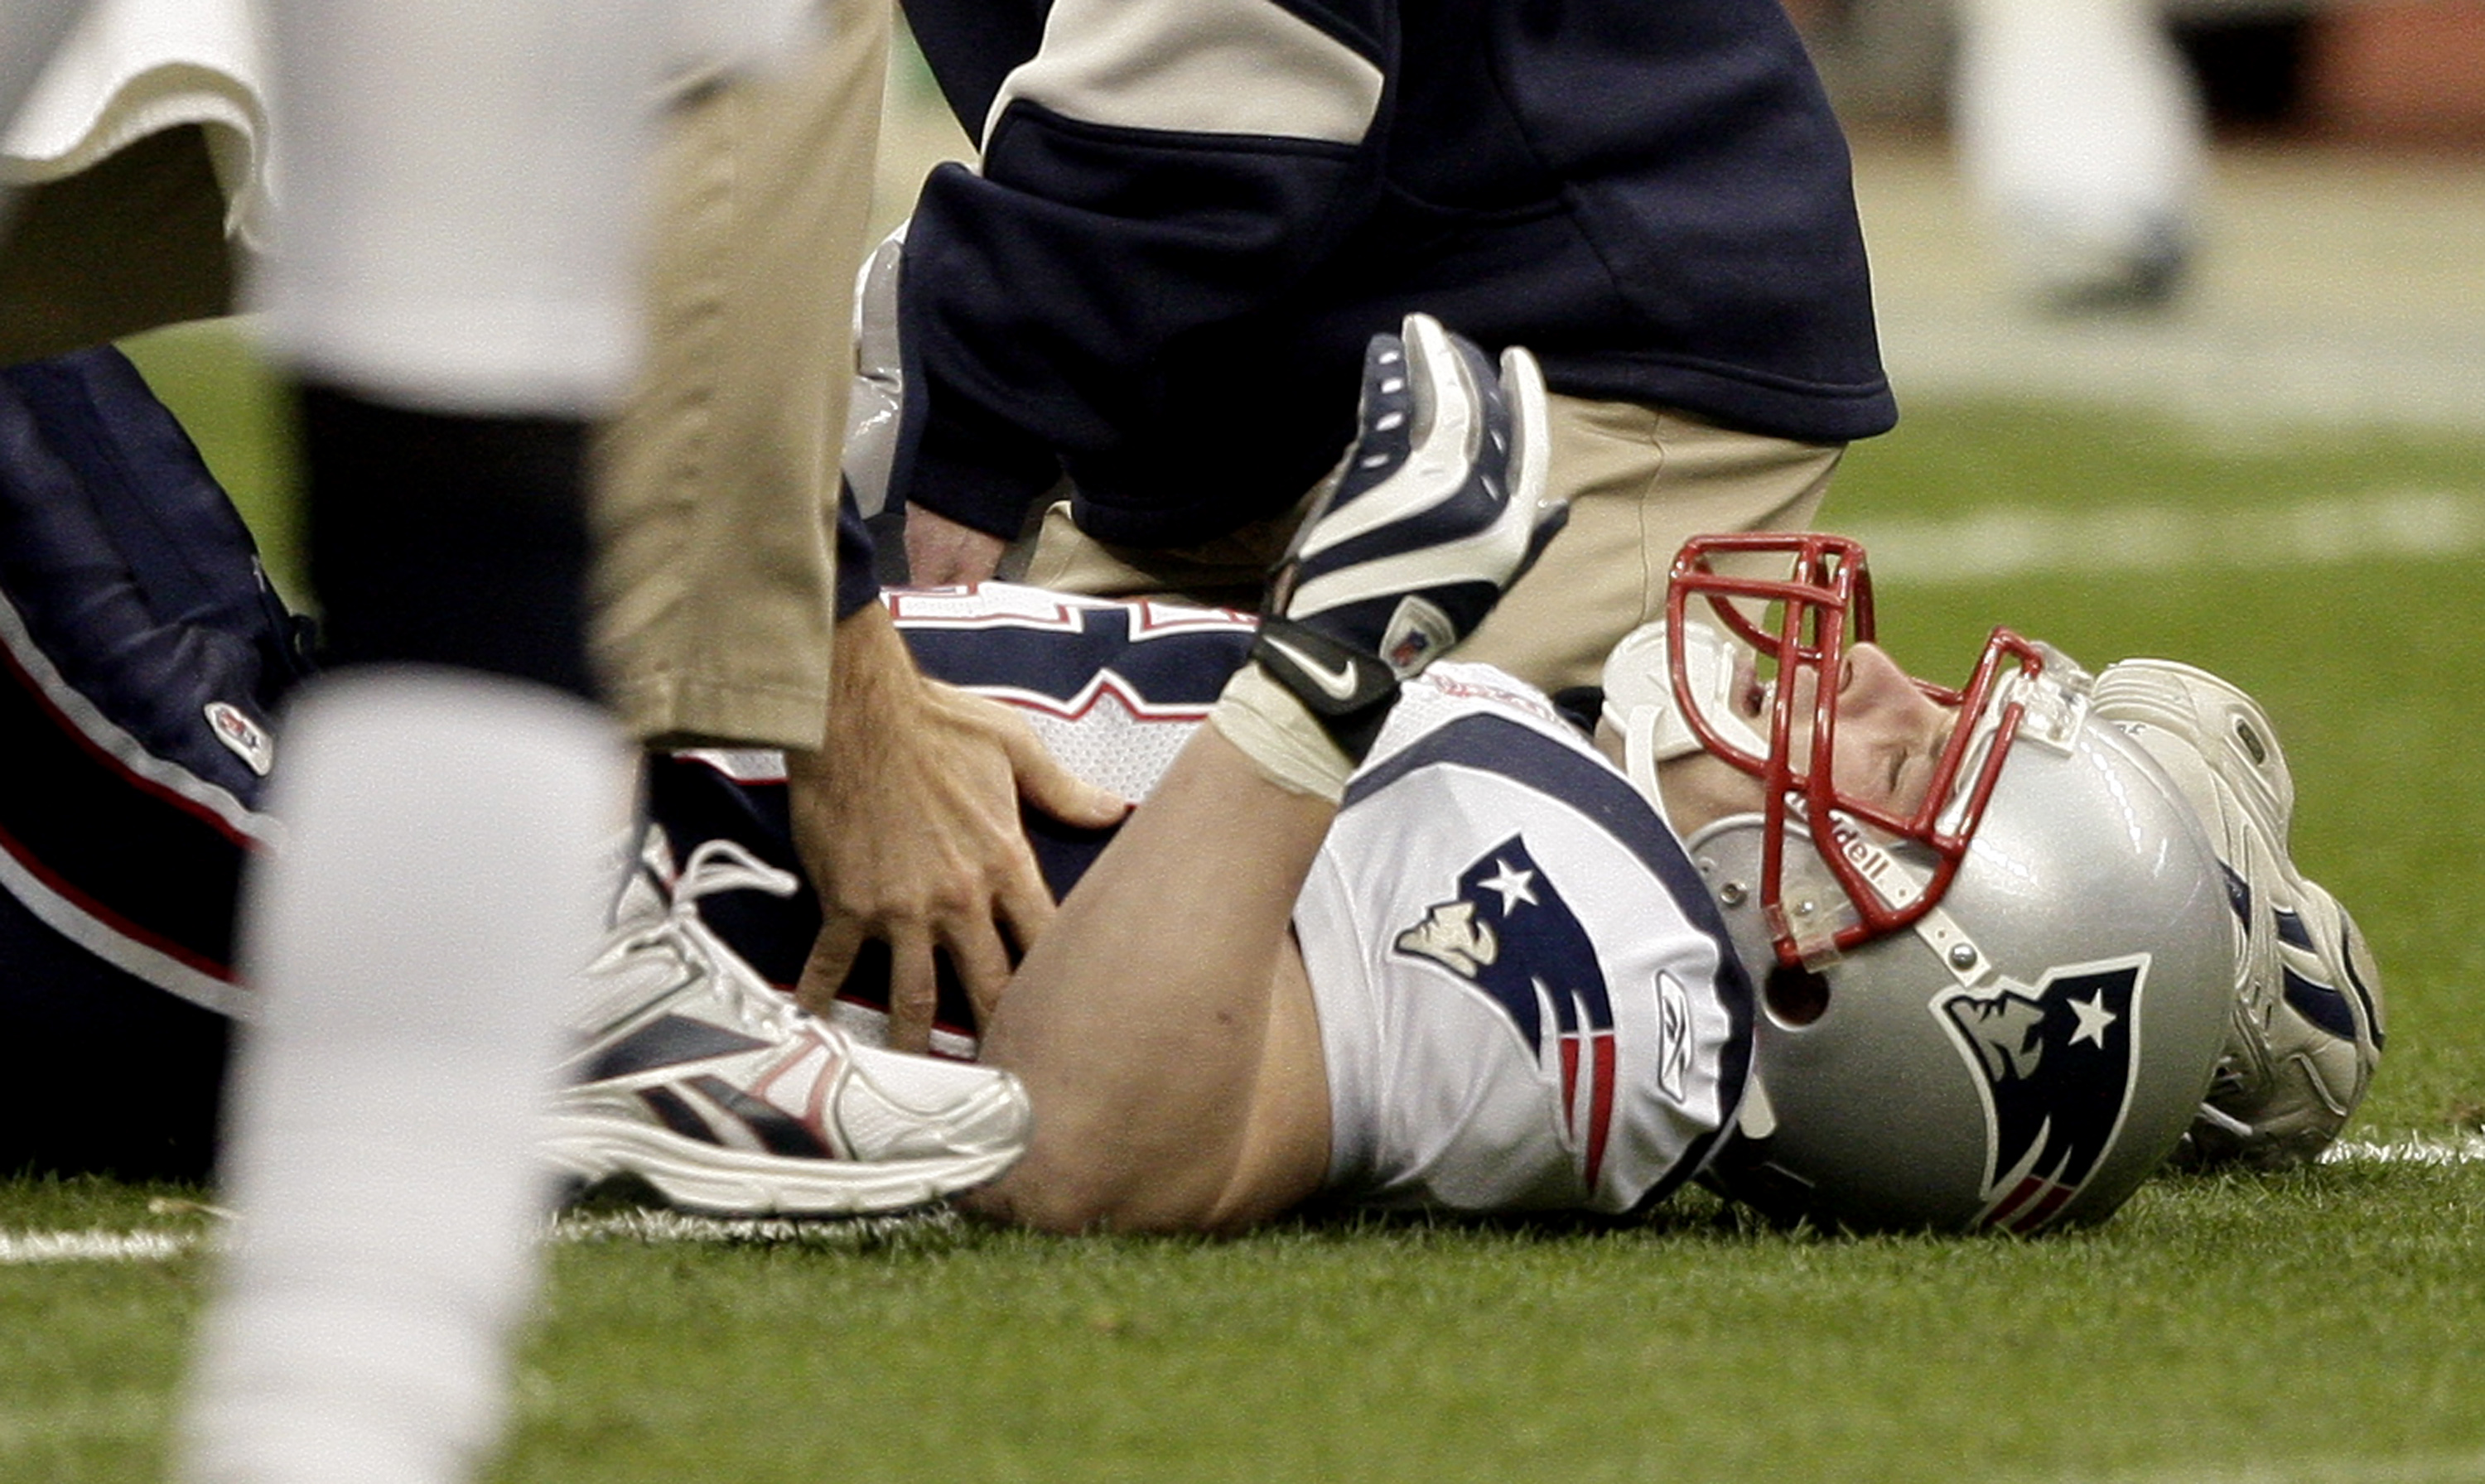 HOUSTON - JANUARY 03:  Wide receiver Wes Welker #83 of the New England Patriots is tended to by medical personnel after injuring his leg against the Houston Texans at Reliant Stadium on January 3, 2010 in Houston, Texas.  (Photo by Bob Levey/Getty Images)